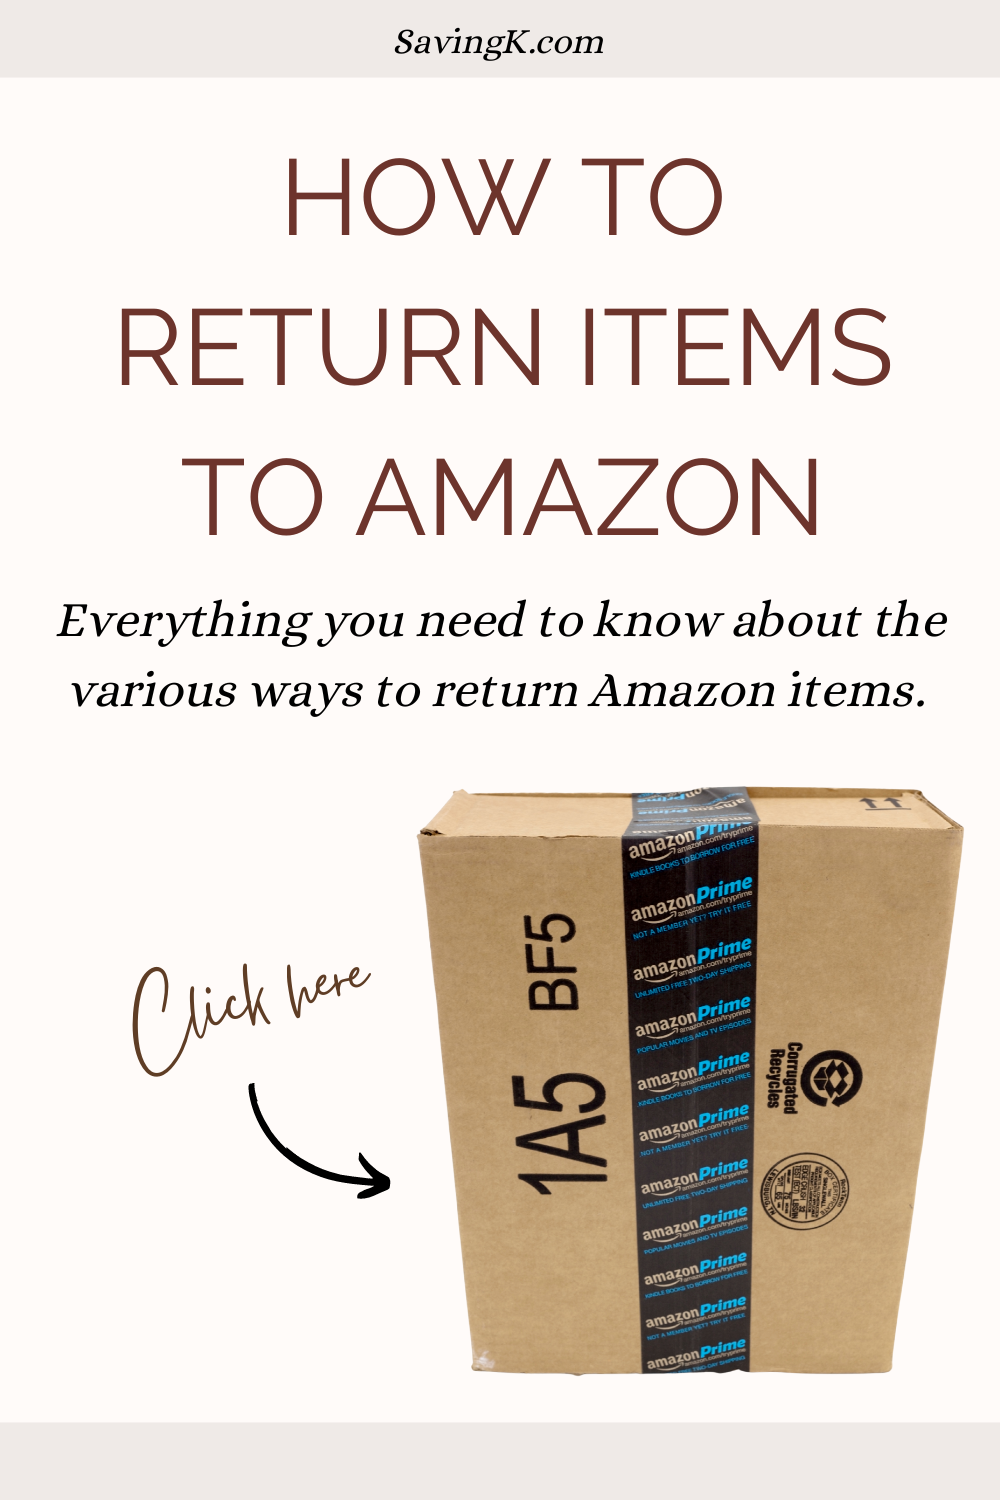 How to Return Items to Amazon